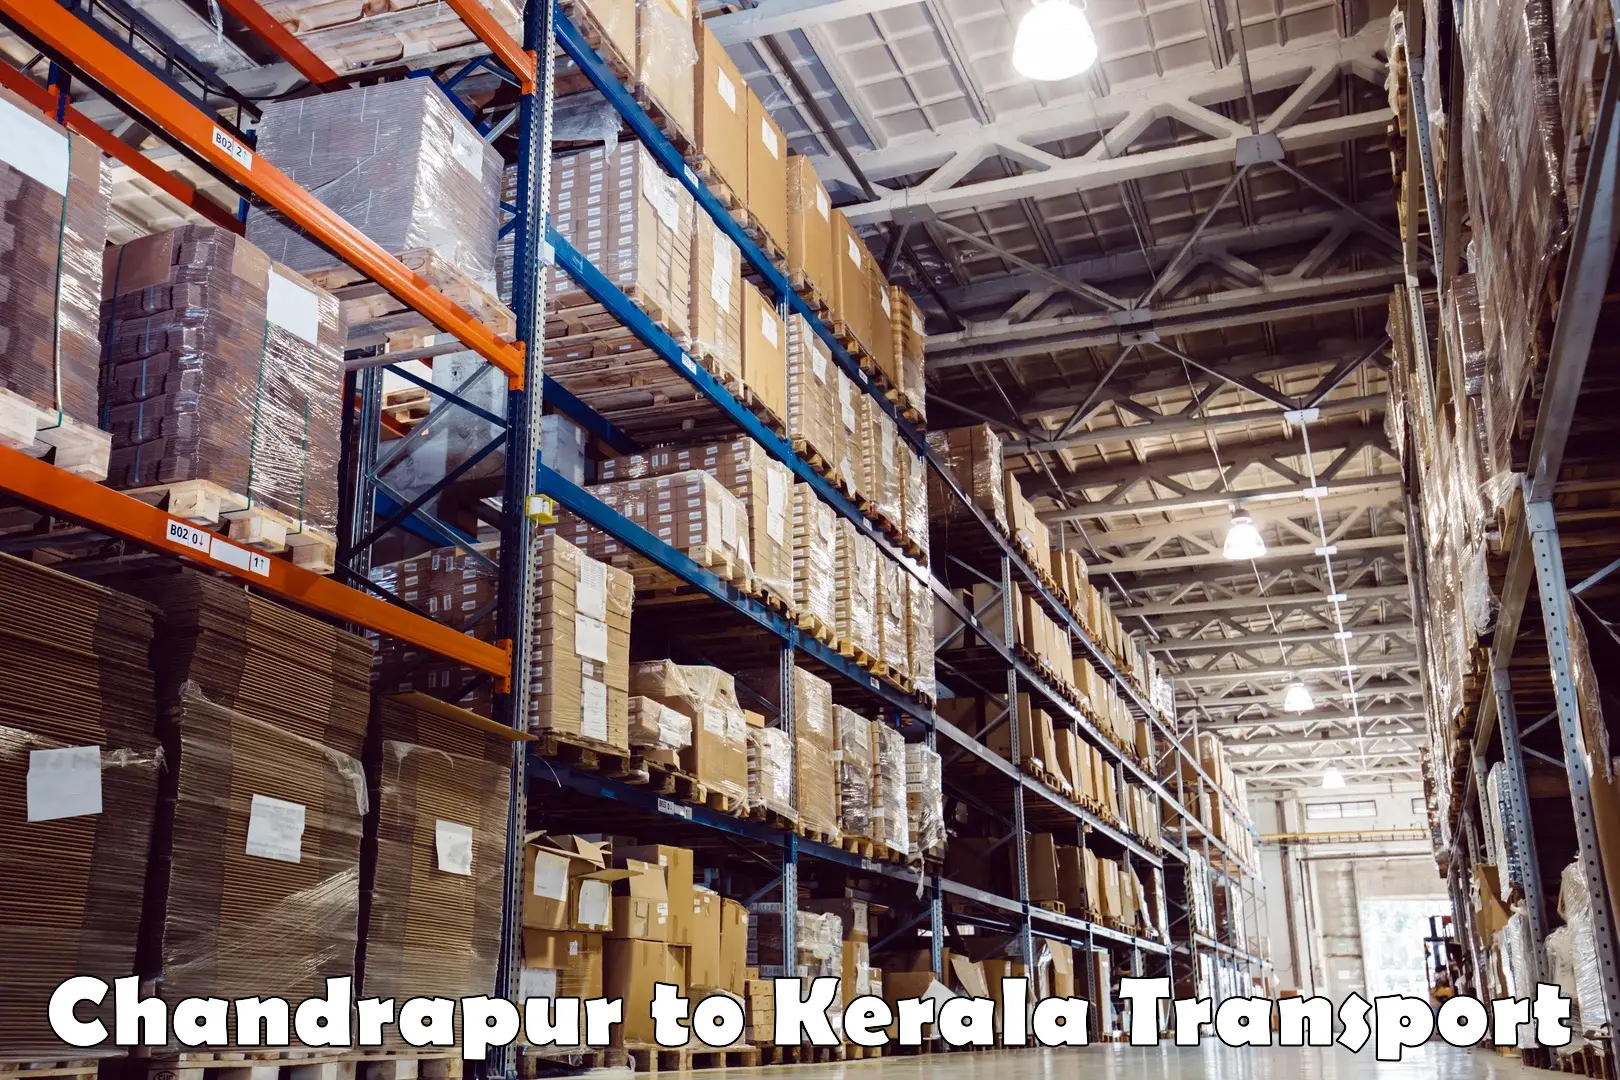 Container transport service Chandrapur to Cochin